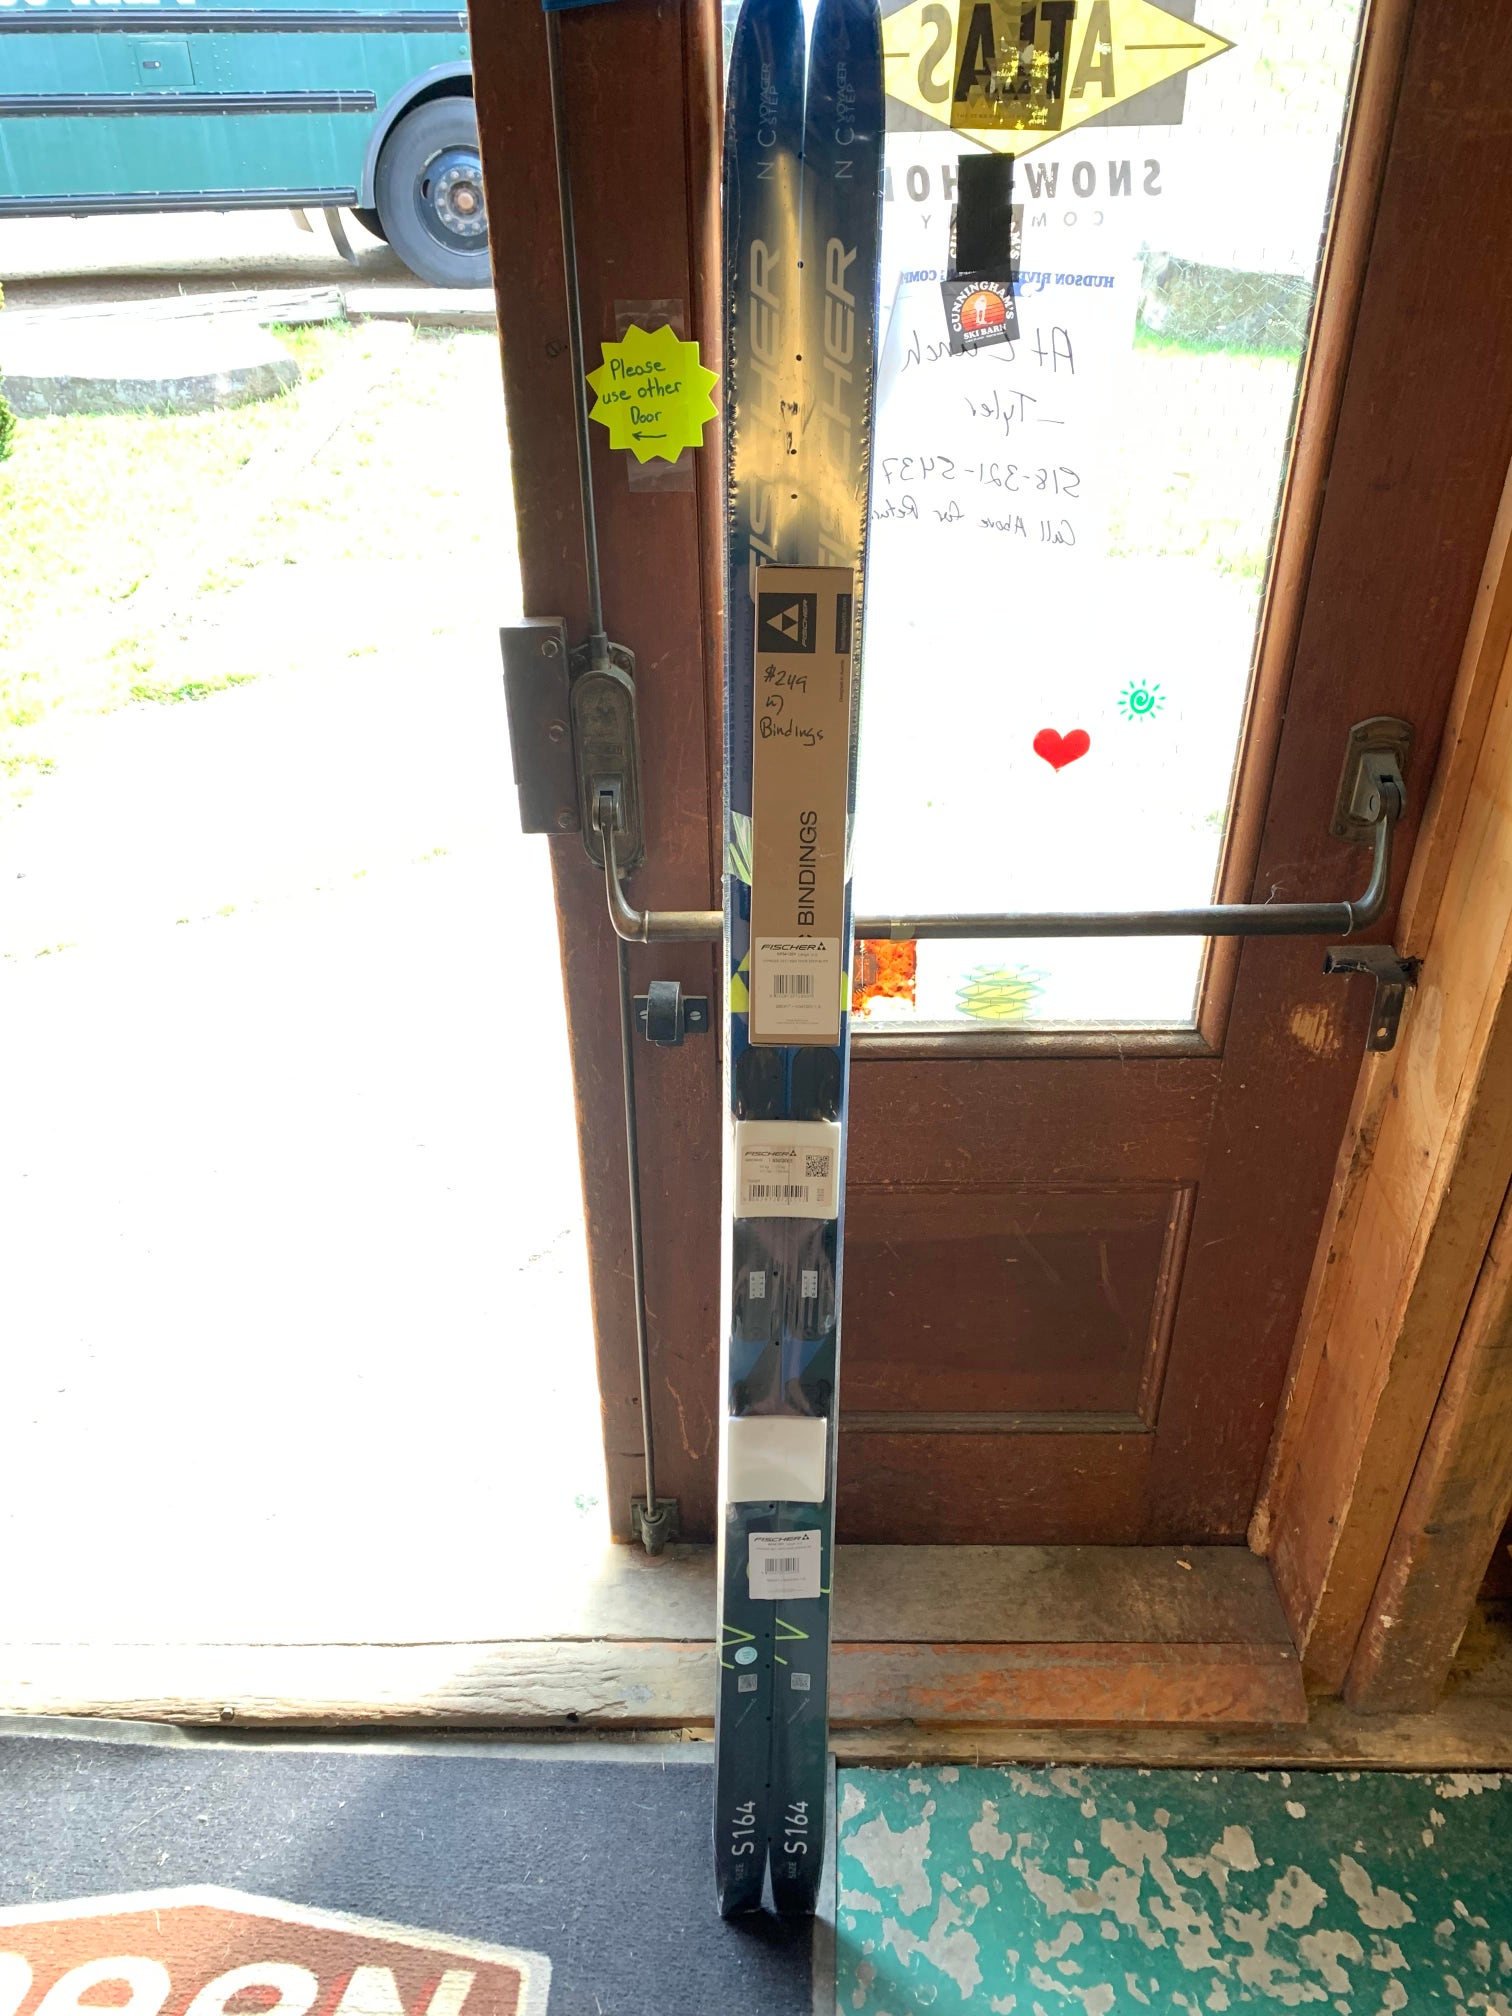 New Men's Fischer Alpine Touring voyager set Skis With Bindings